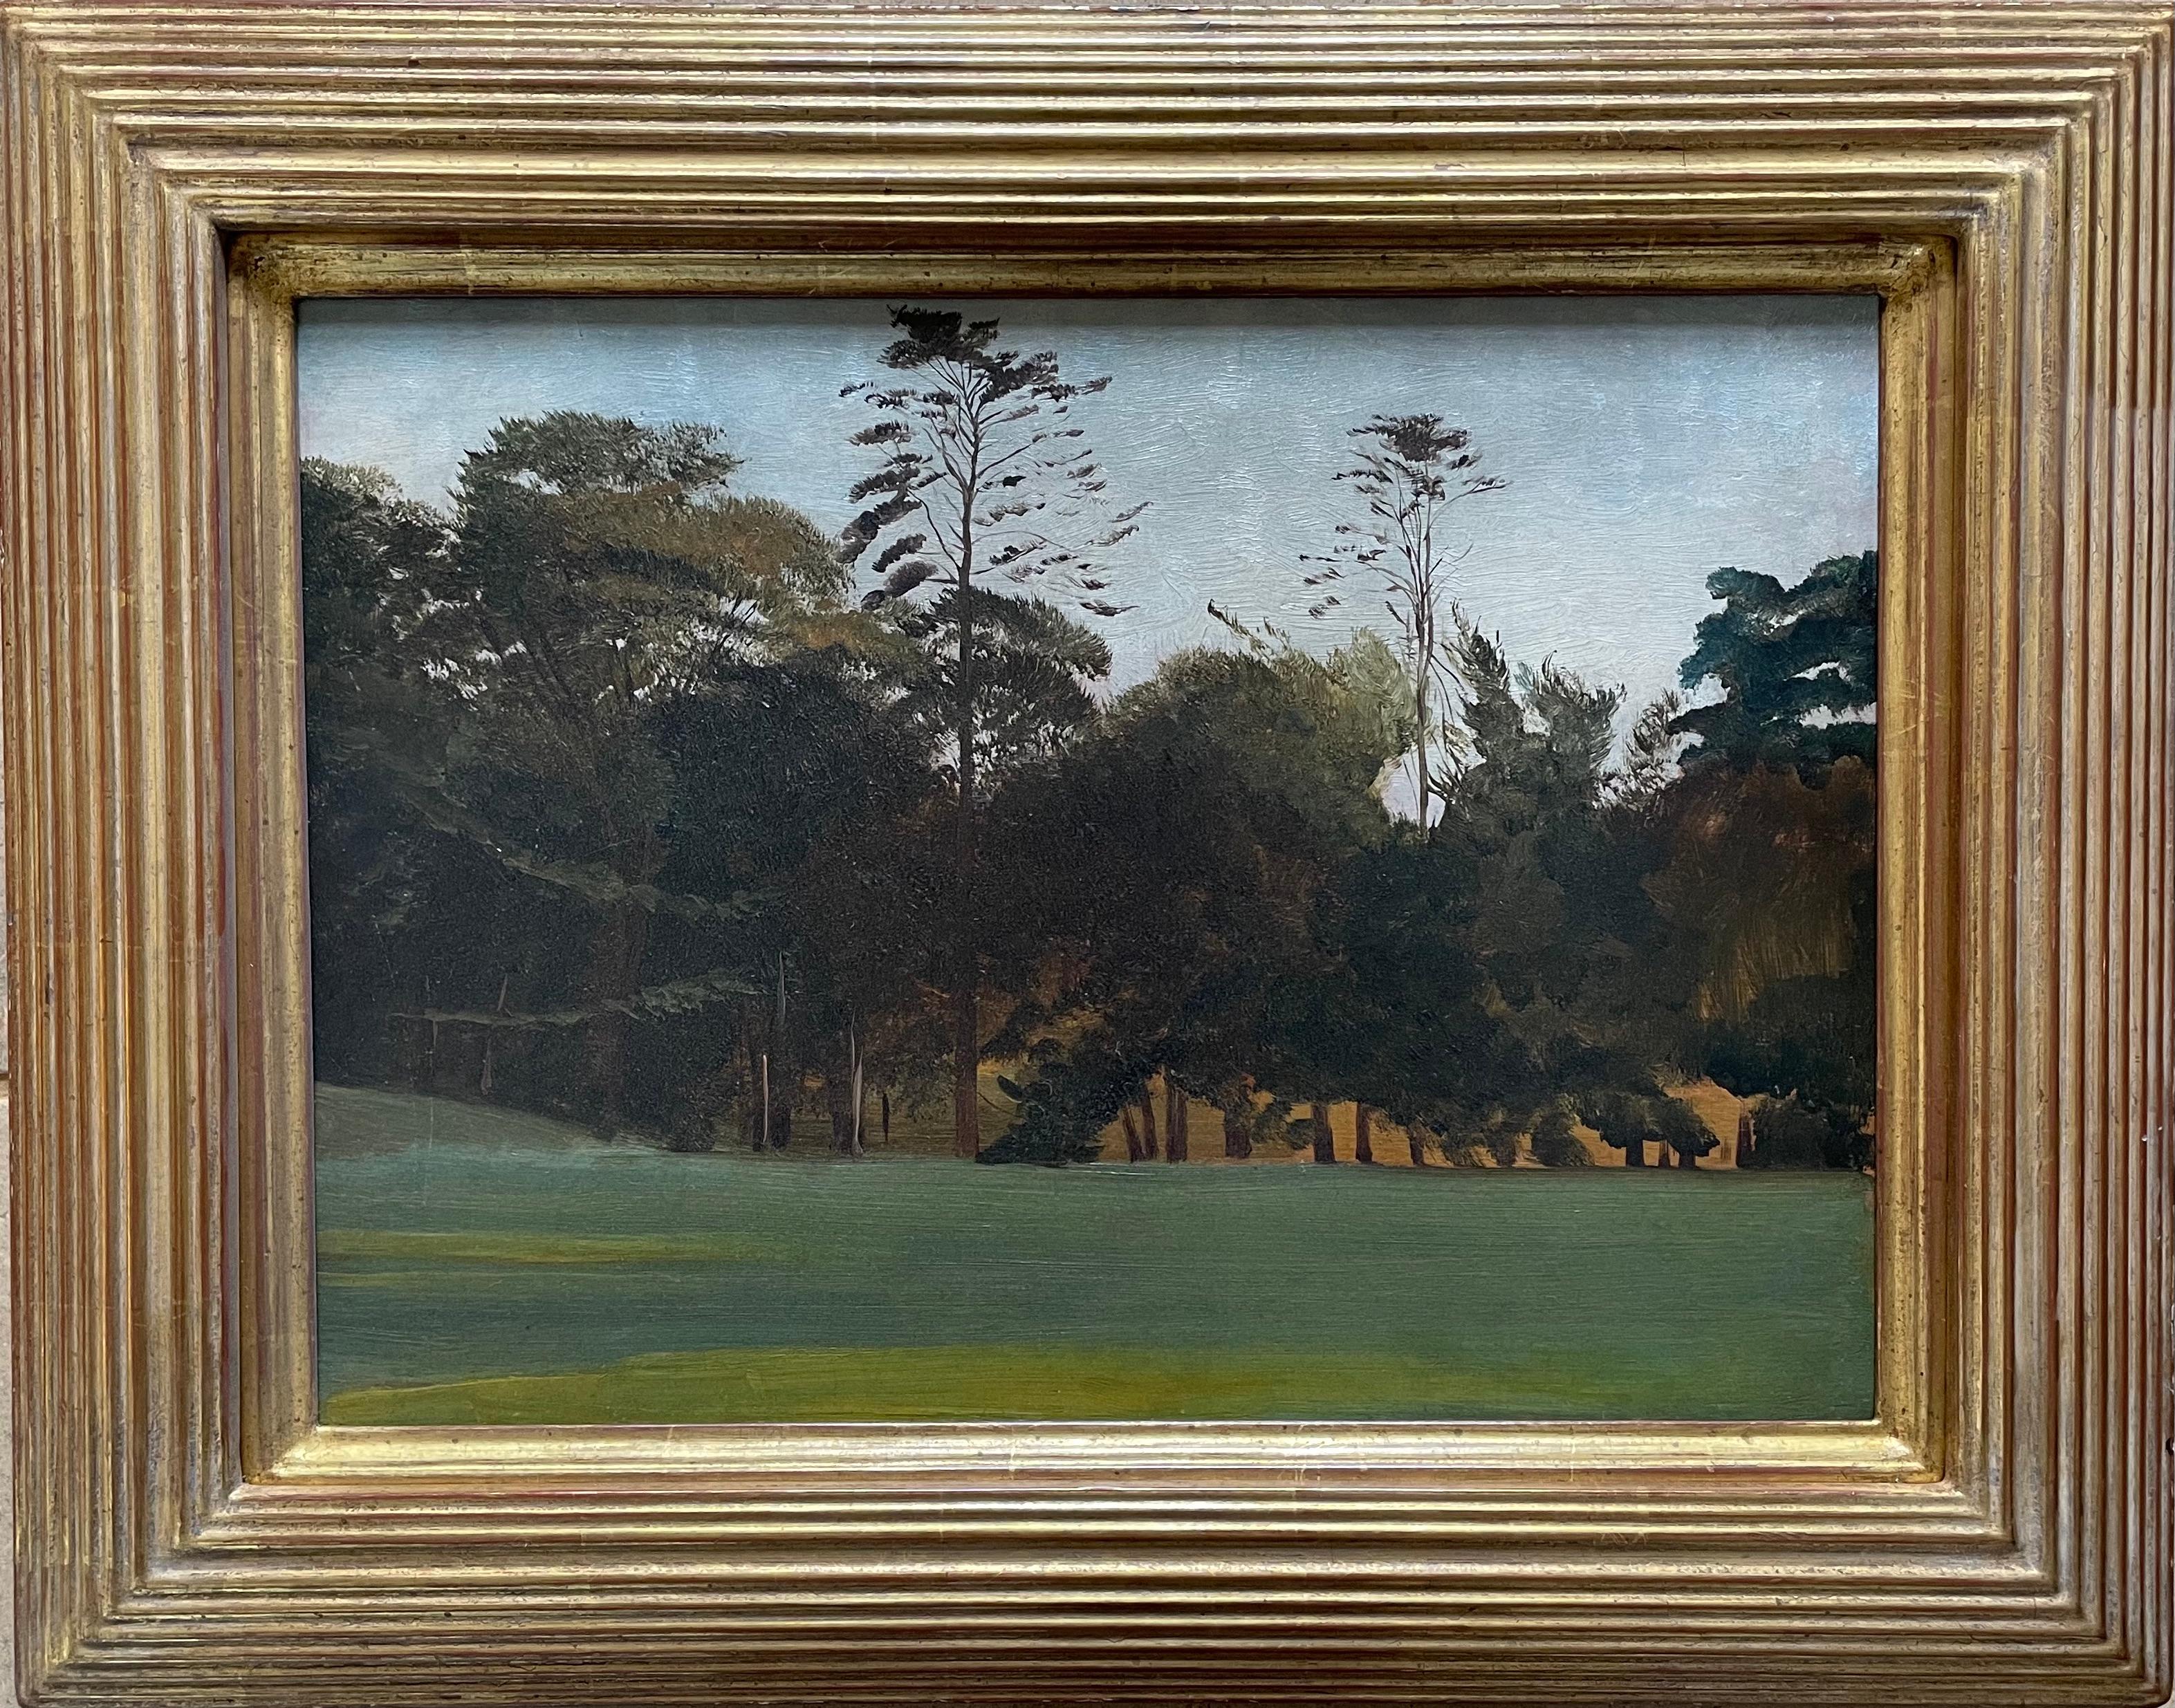 GEORGE HOWARD, 9th EARL OF CARLISLE
(1843-1911)

A Line of Trees

Oil on panel
Framed

26.5 by 36.5 cm., 10 ½ by 14 ½ in.
(frame size 37 by 47.5 cm., 14 ½ by 18 ¾ i.)

Provenance:
Lady Cecilia Howard, daughter of George Howard, 9th Duke of Carlisle,